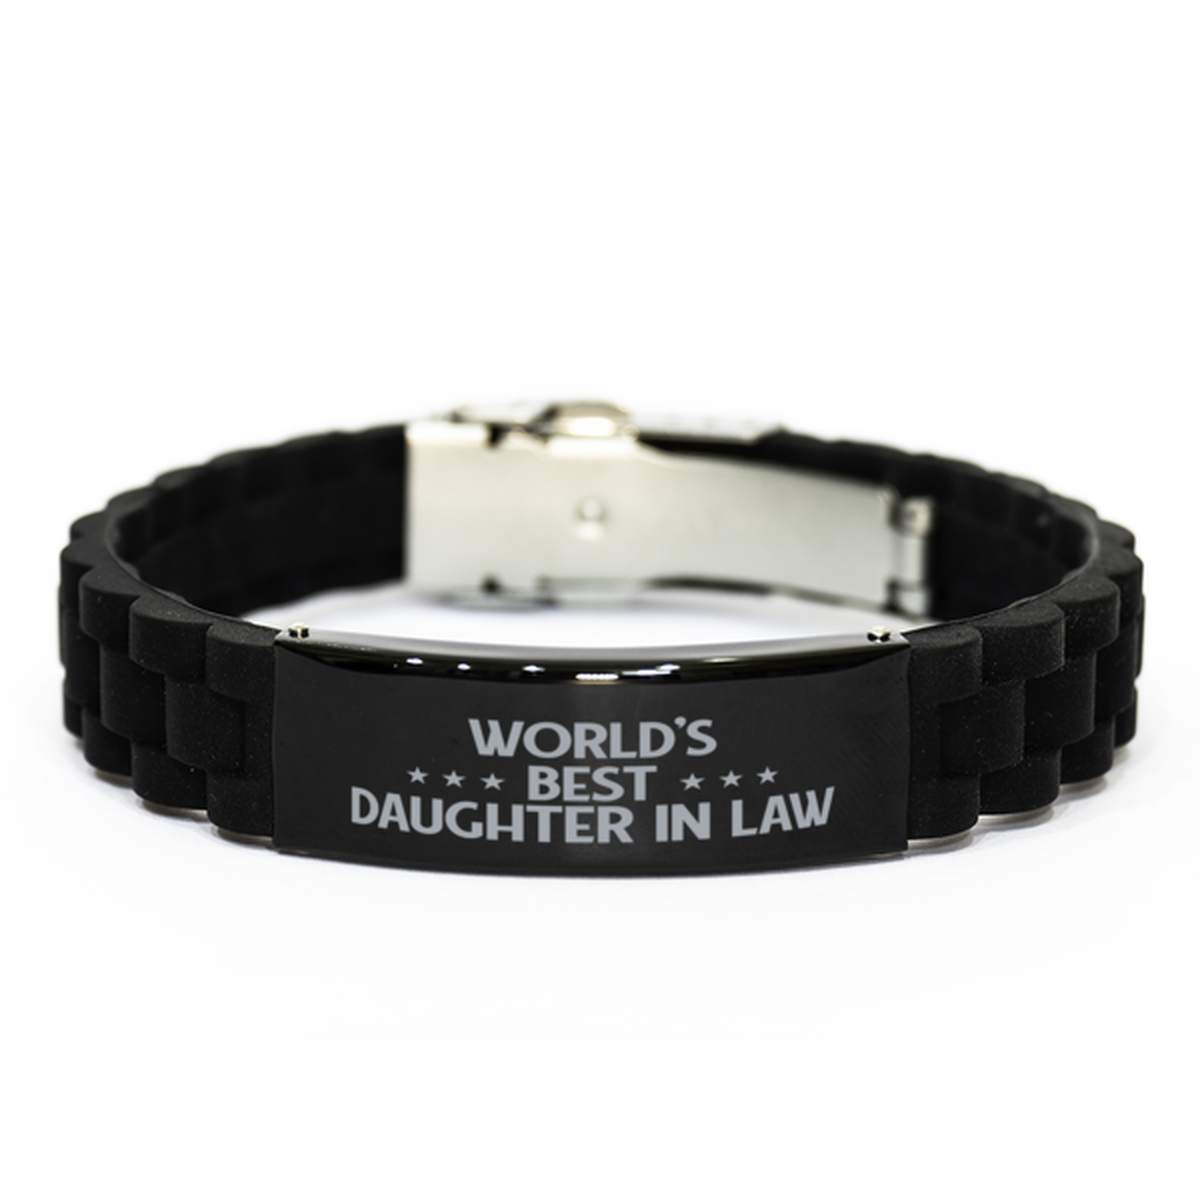 World's Best Daughter in law Gifts, Funny Black Engraved Bracelet For Daughter in law, Family Gifts For Women